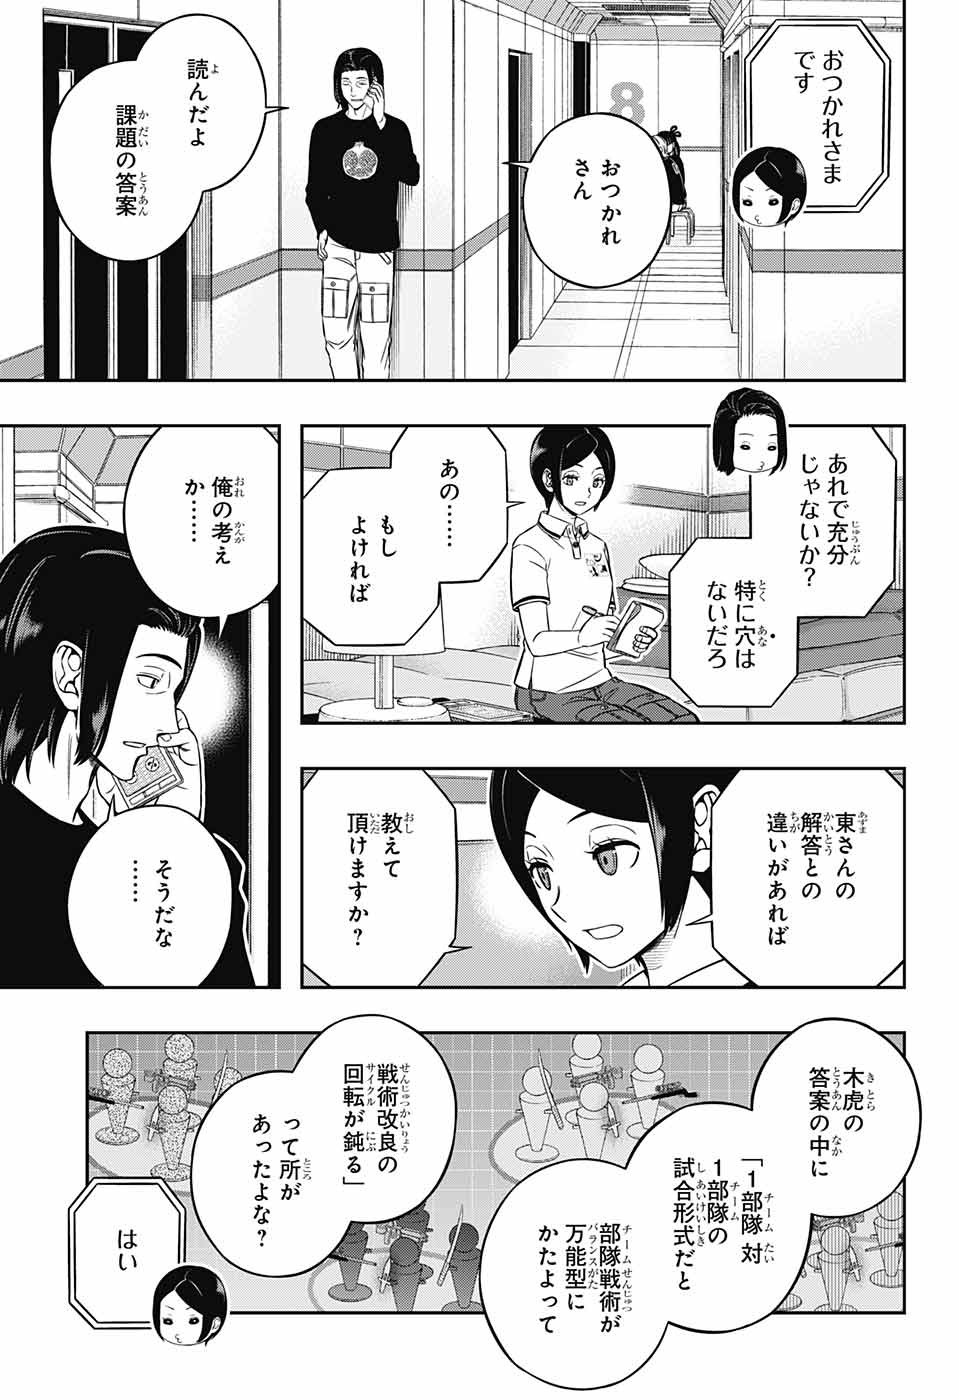 World Trigger - Chapter 221 - Page 3